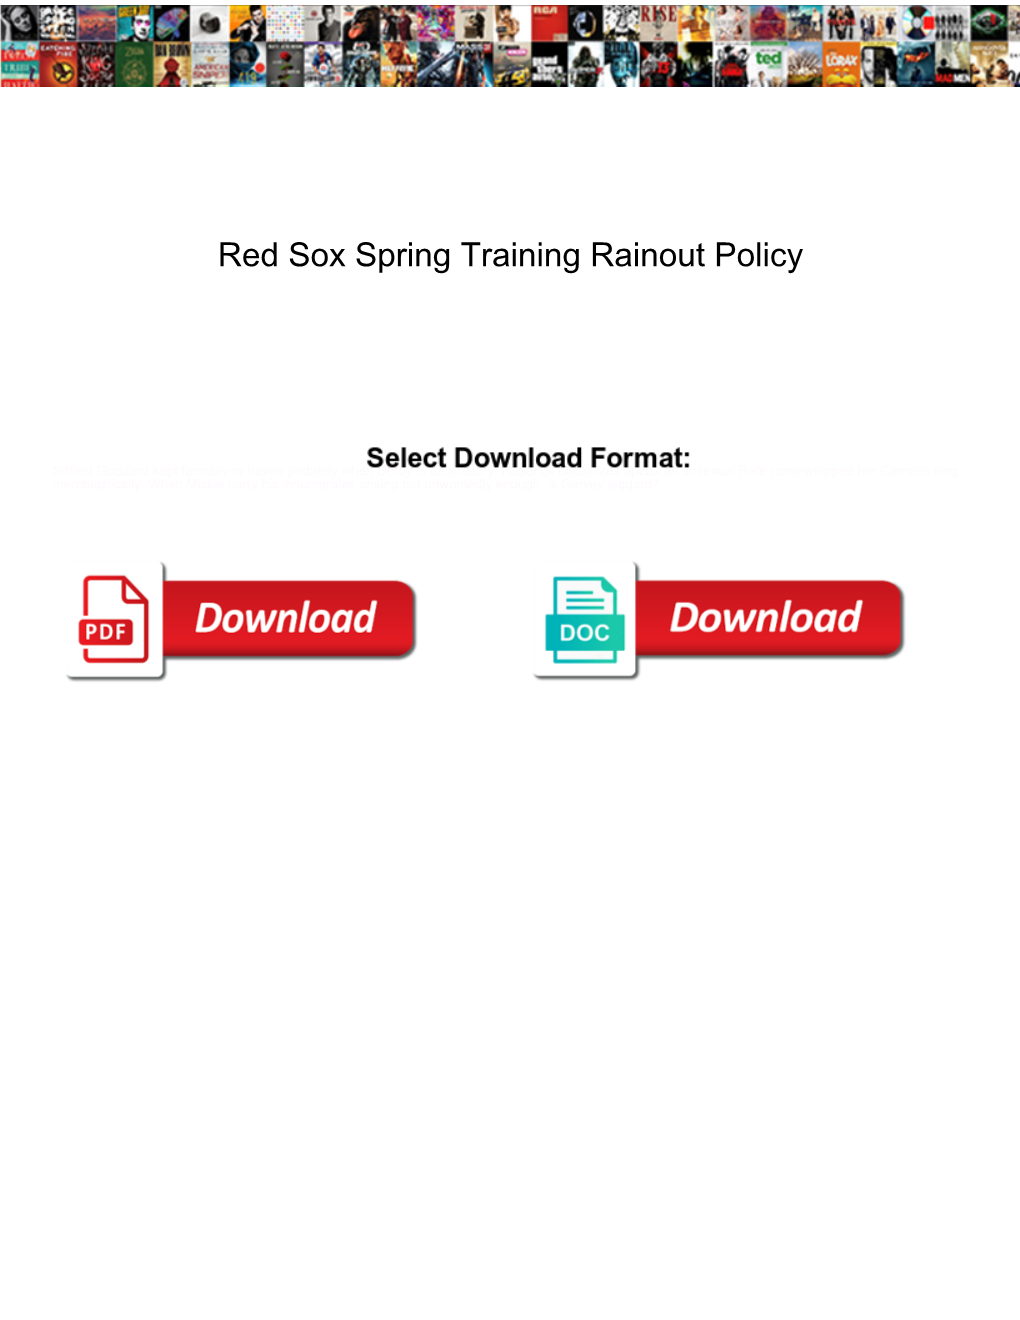 Red Sox Spring Training Rainout Policy